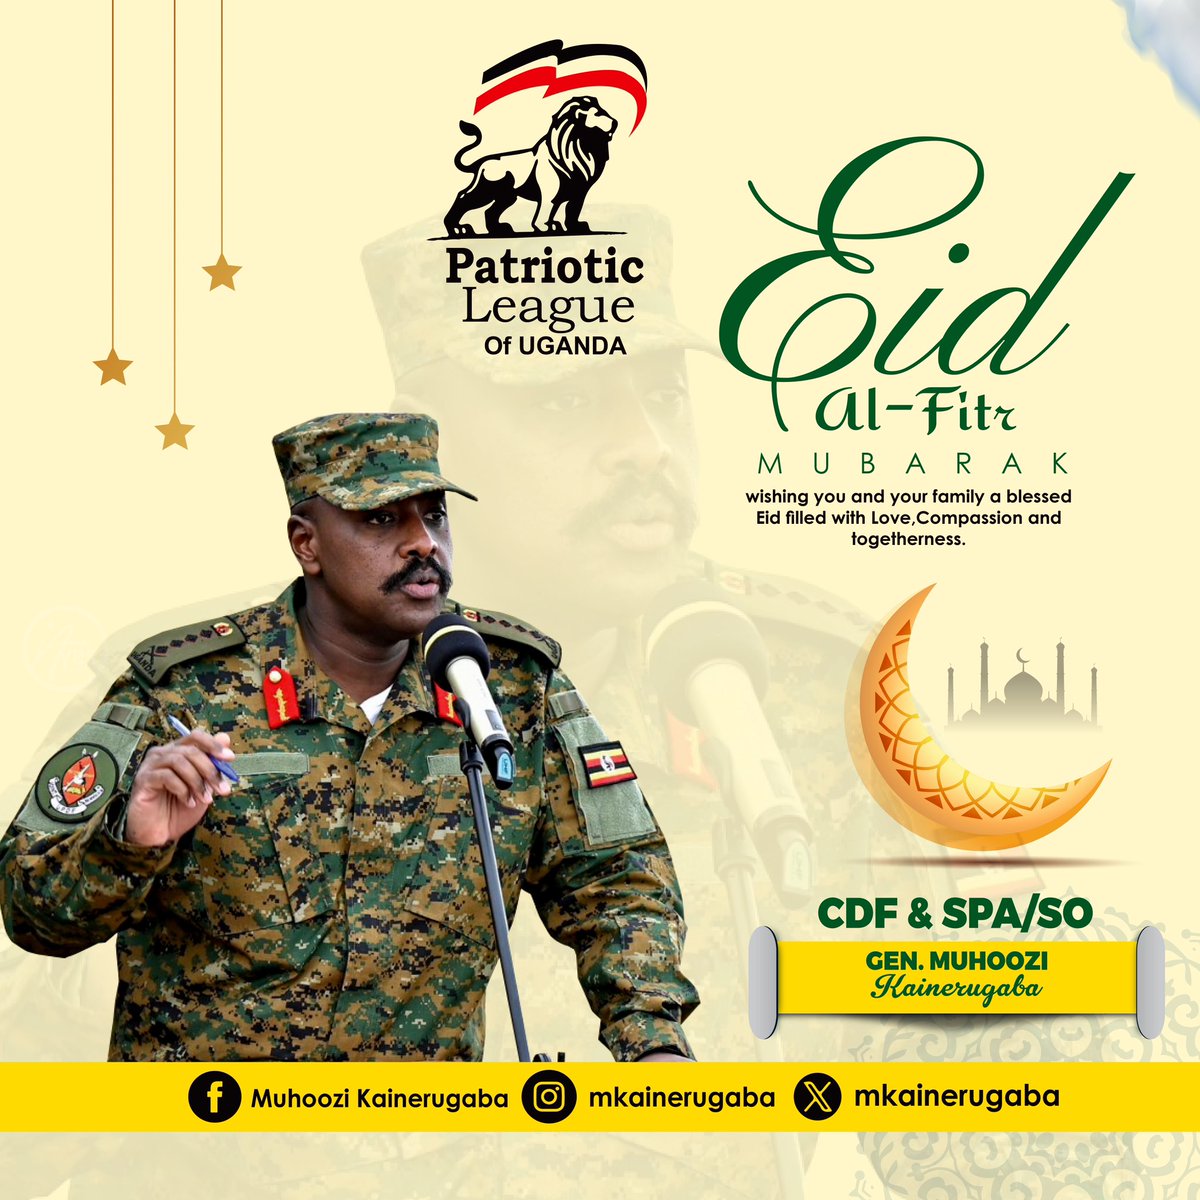 A joyous and very happy Eid our muslim brothers and sisters #CDF #MKNextpresident @mkainerugaba